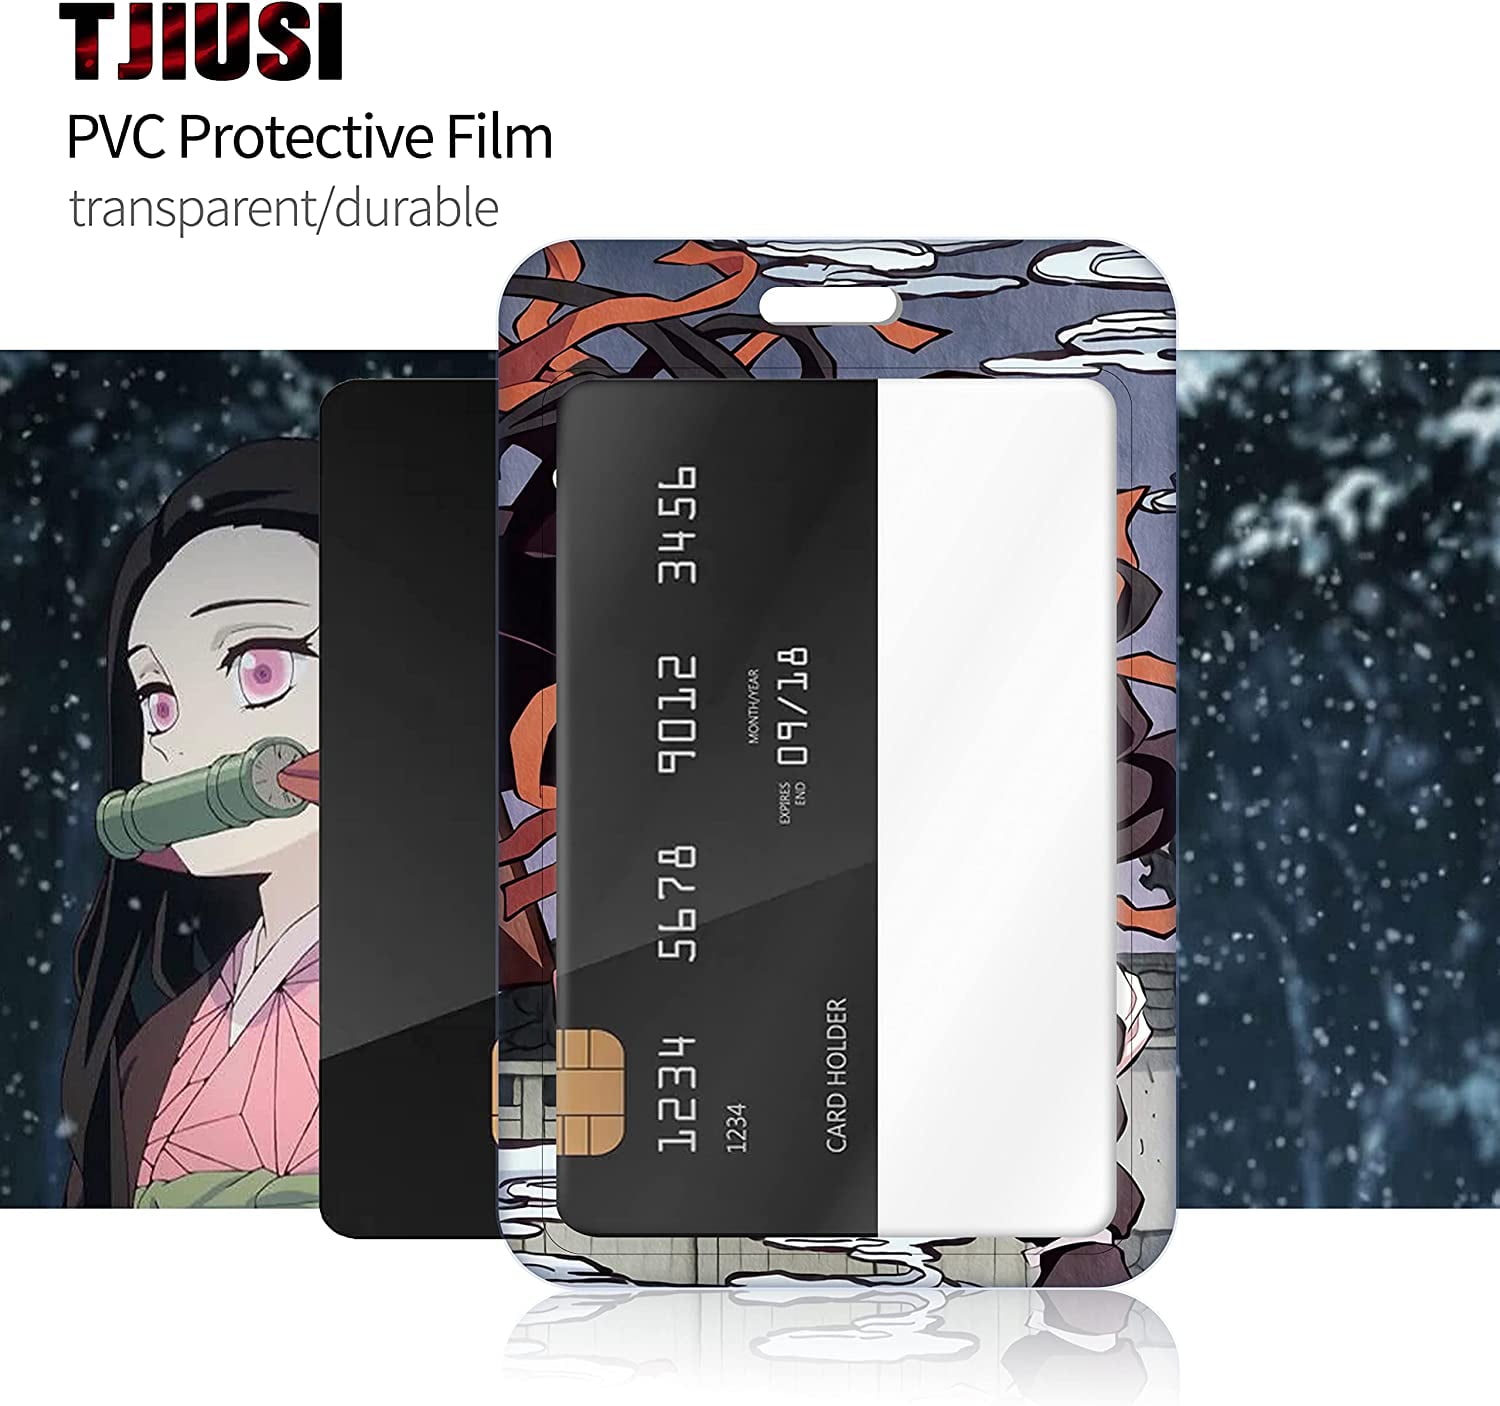 Details 81+ anime credit card designs latest - awesomeenglish.edu.vn